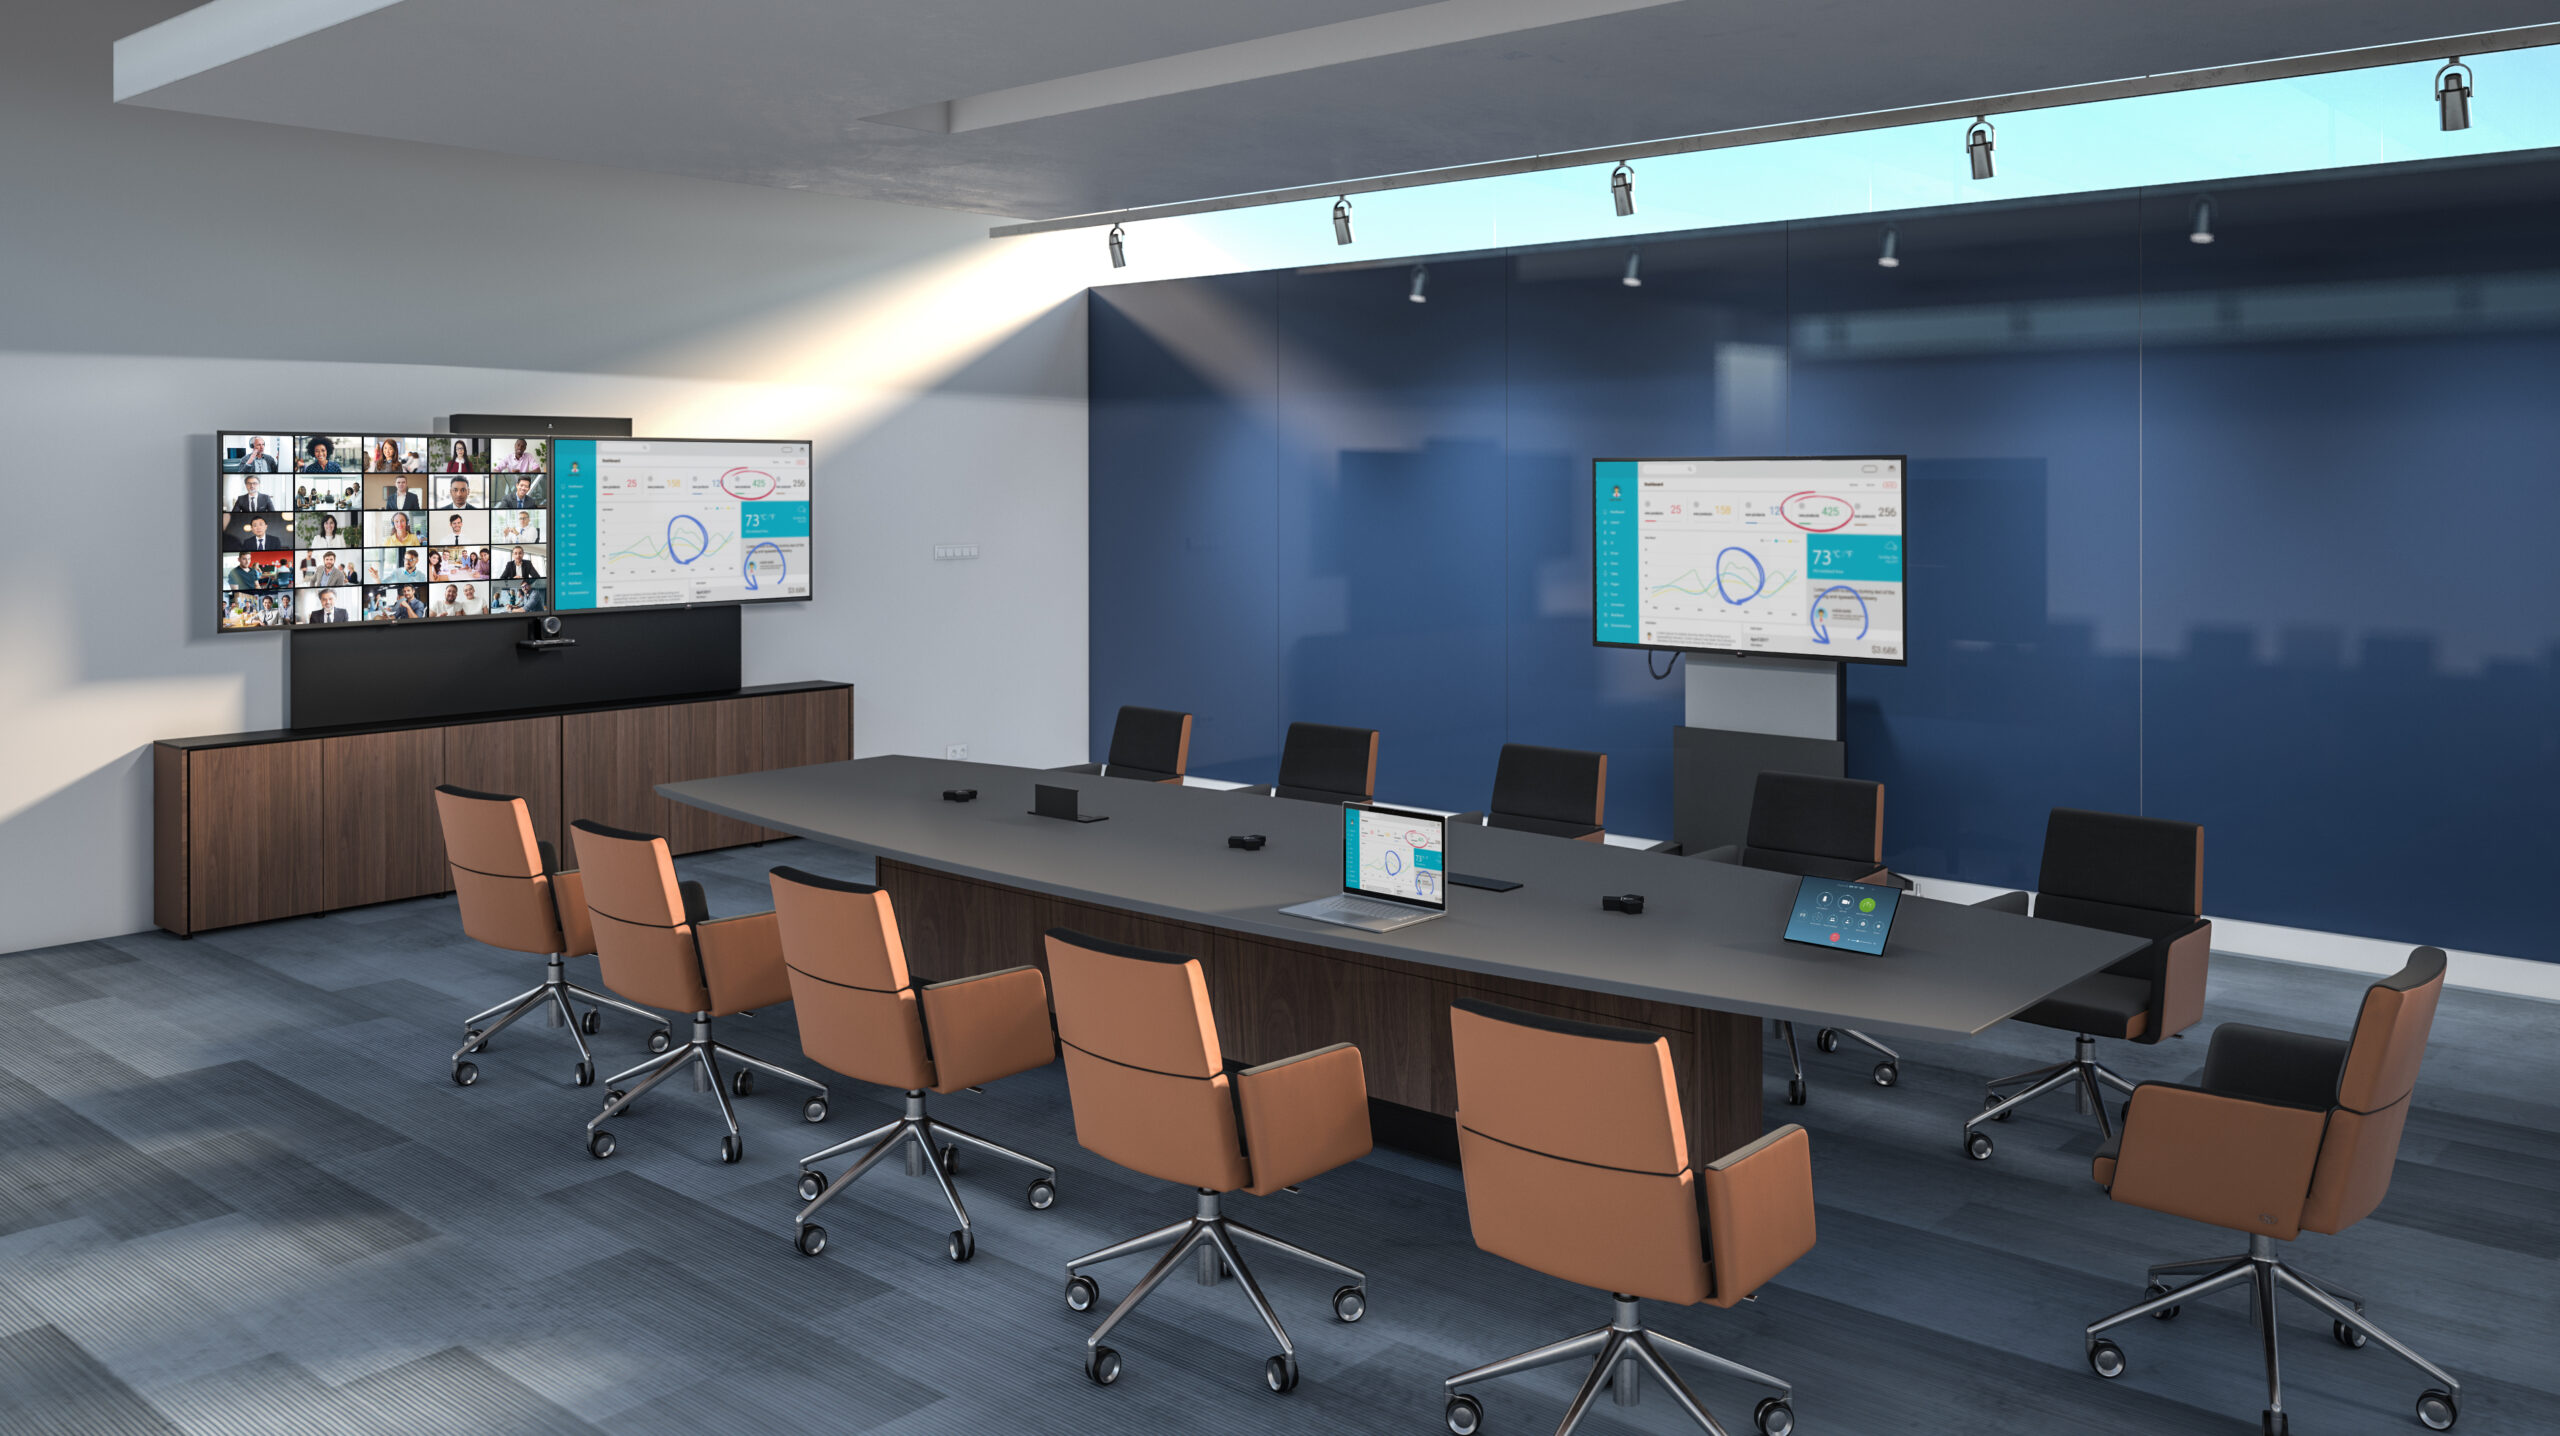 Conference room with multiple displays and video conferencing system